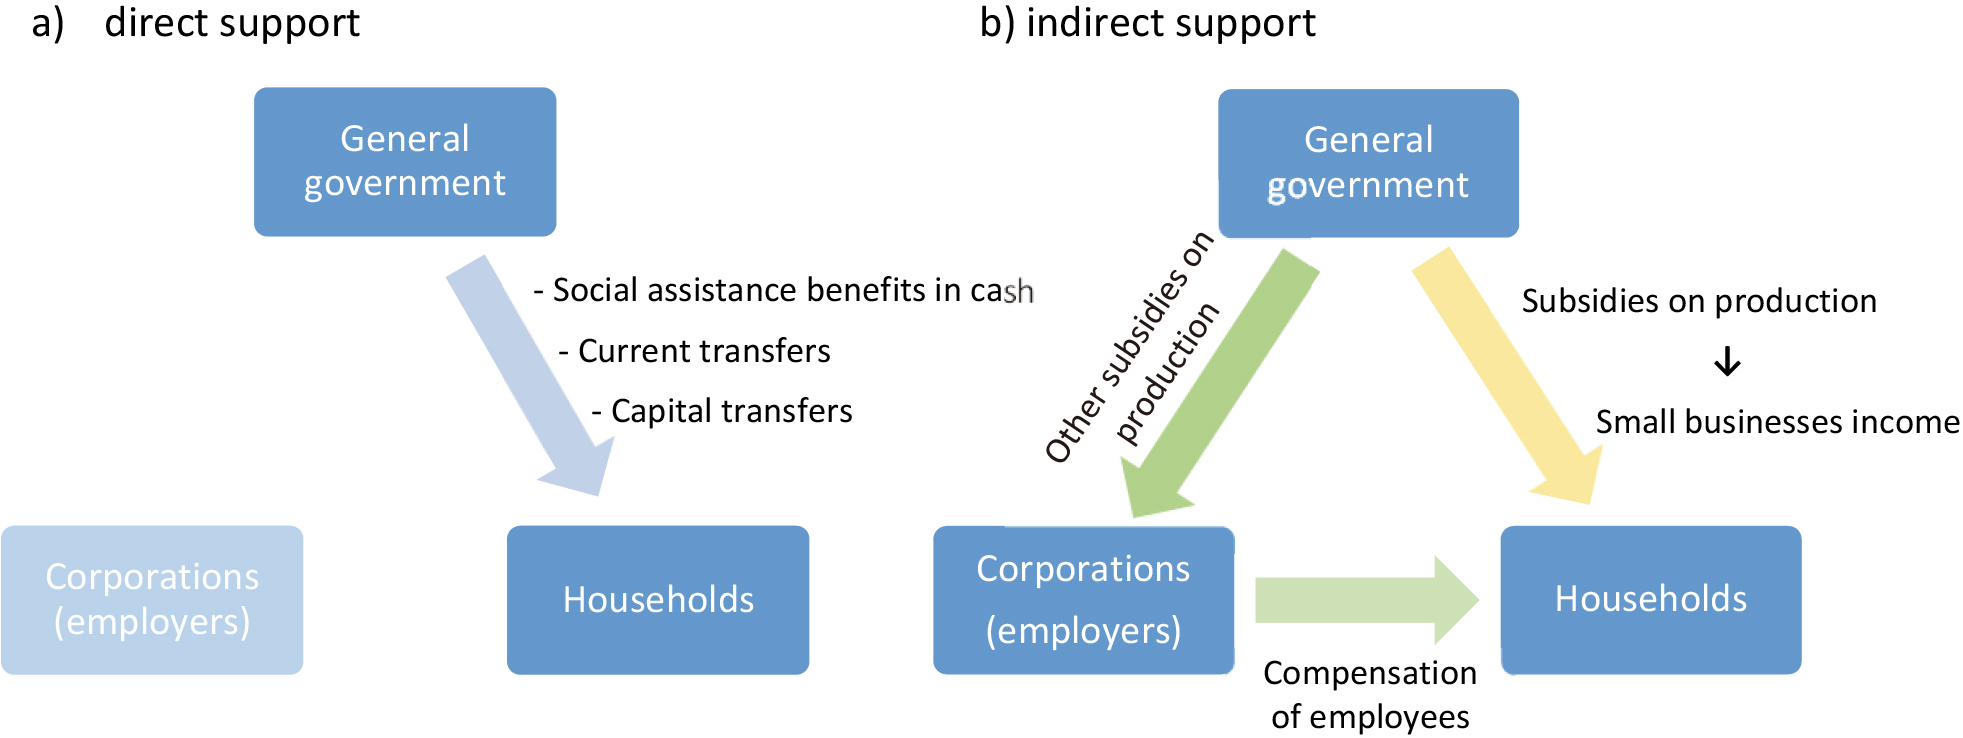 Support schemes helping households directly (a) and indirectly (b).